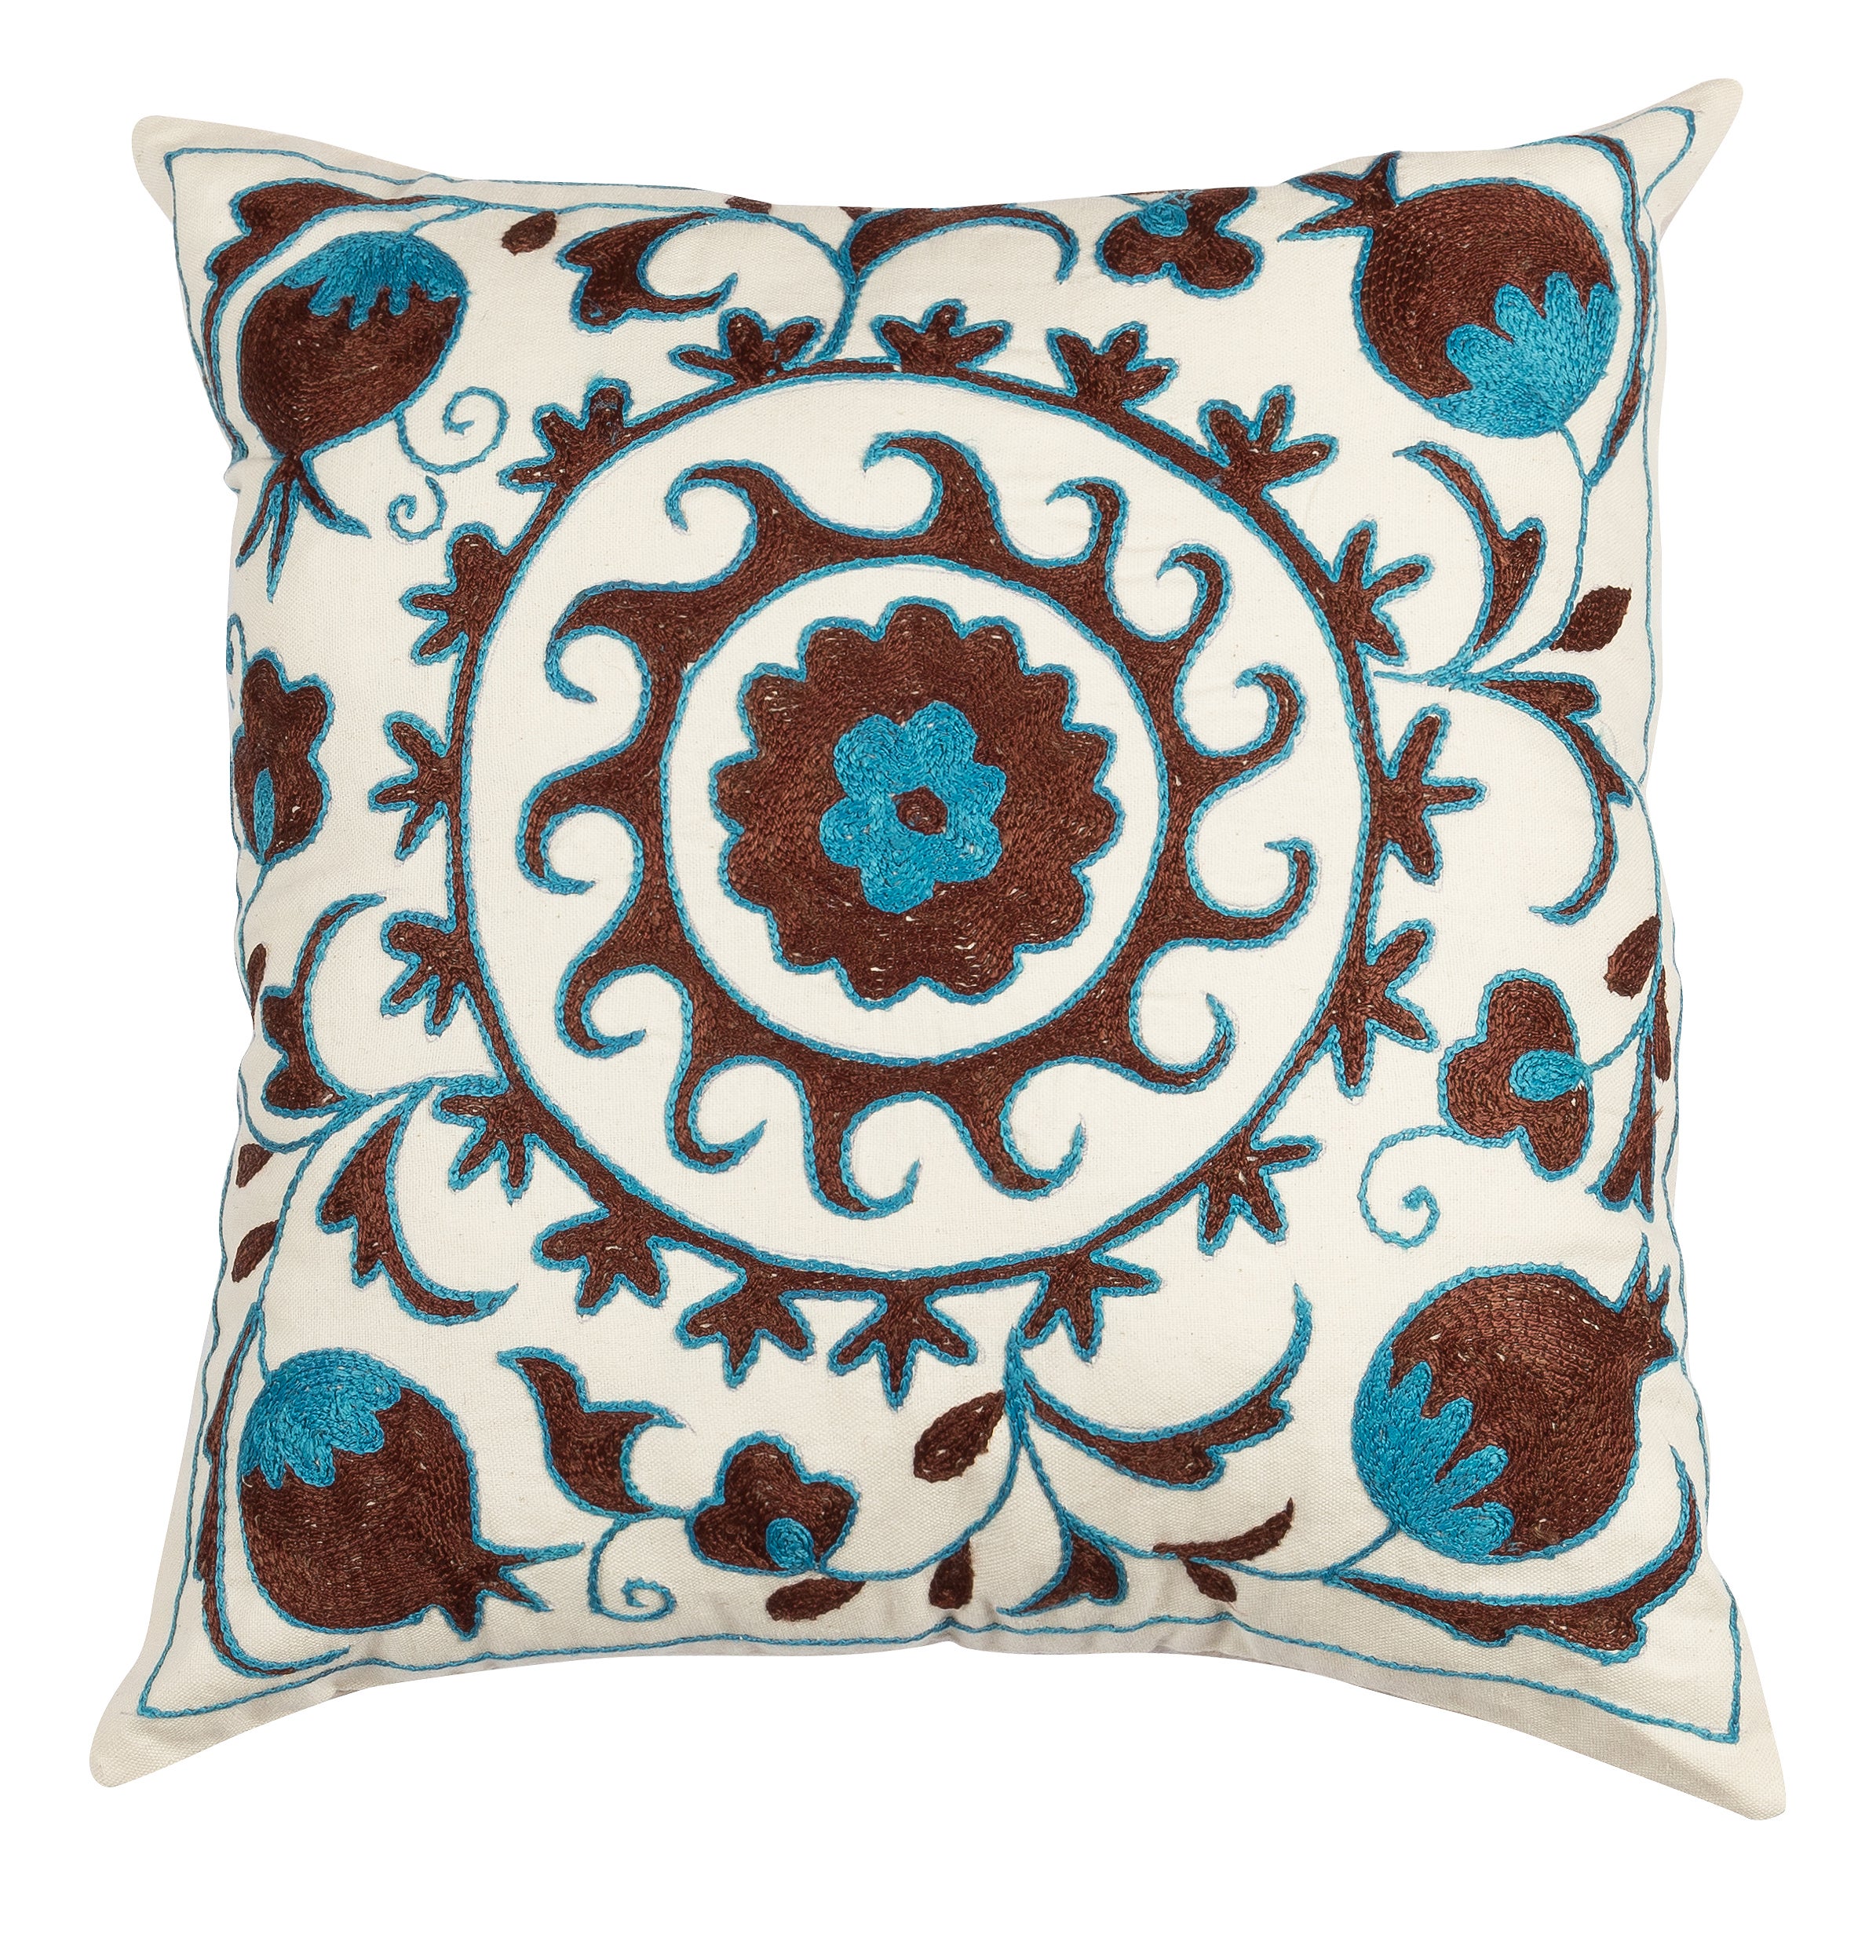 18''x18'' Square Silk Hand Embroidery Suzani Cushion Cover in Blue, Cream, Brown For Sale